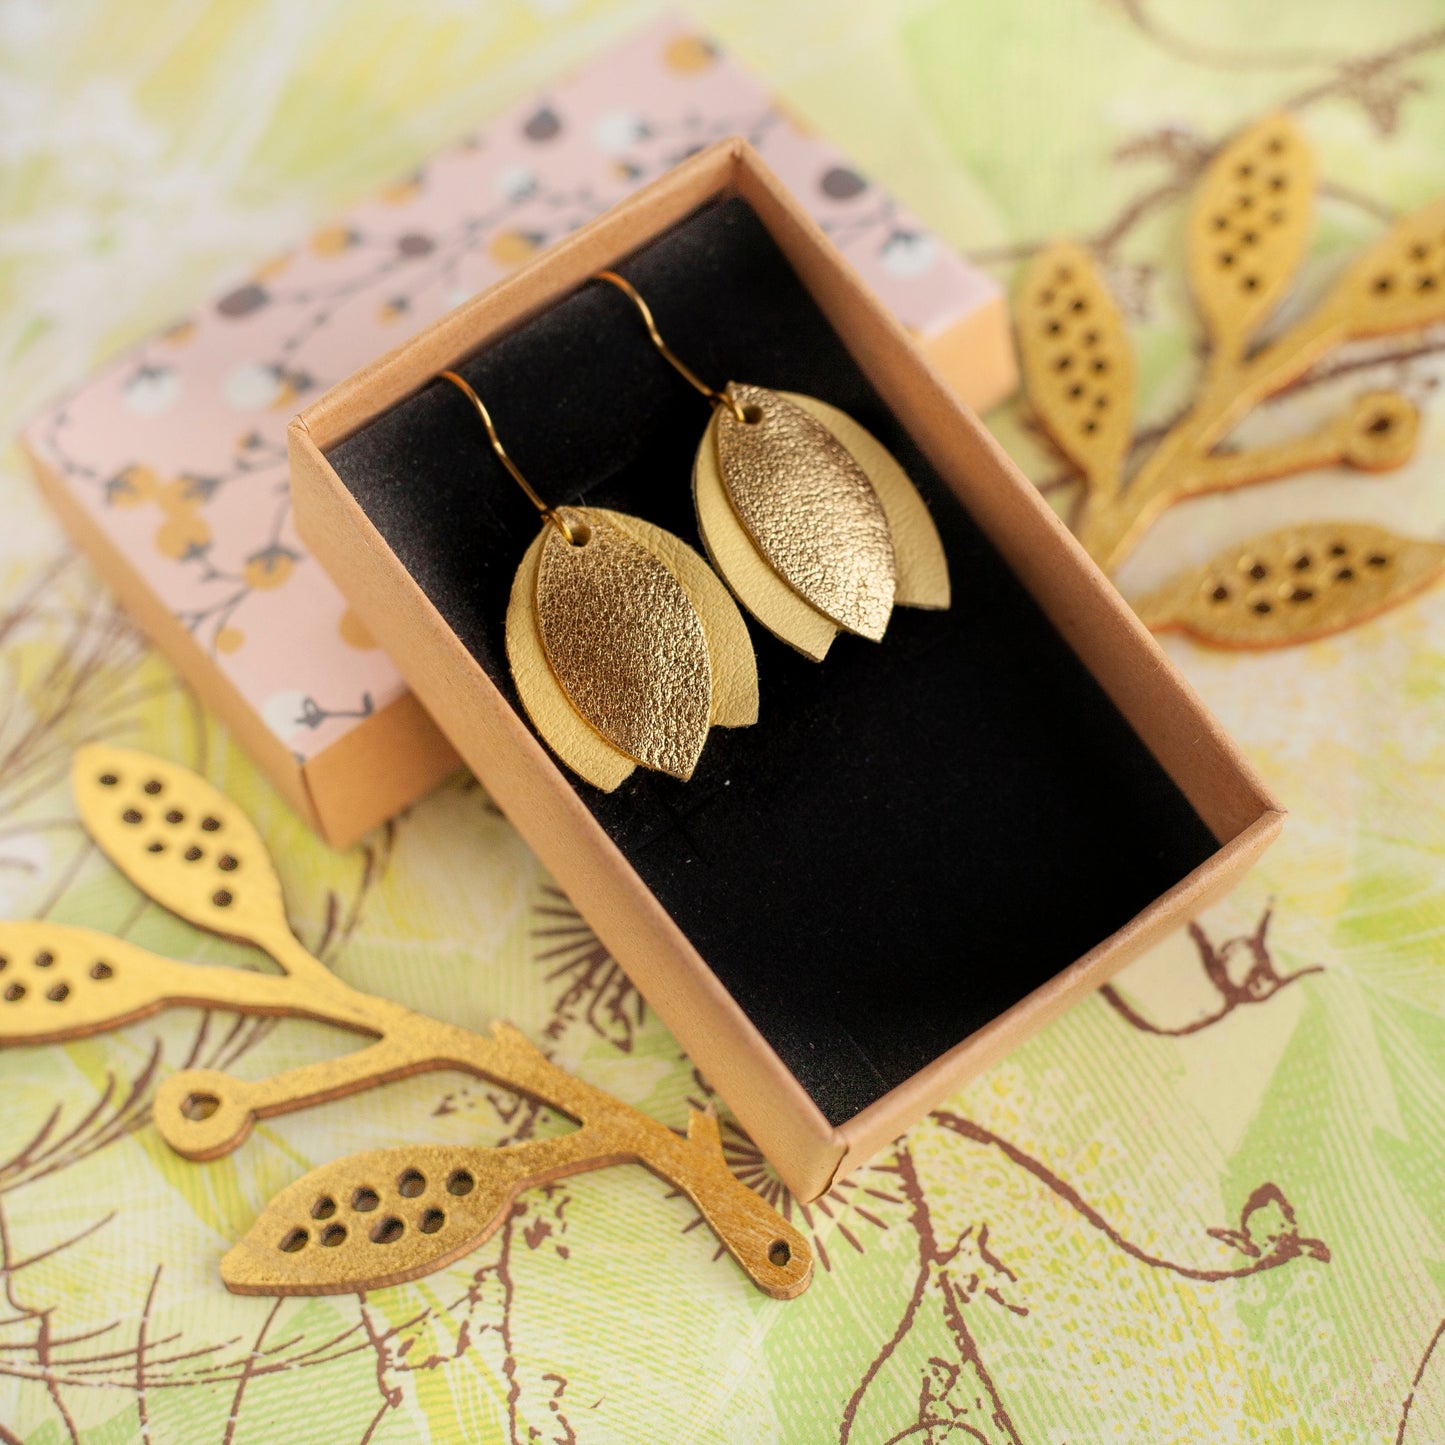 Gold and yellow leather tulip earrings